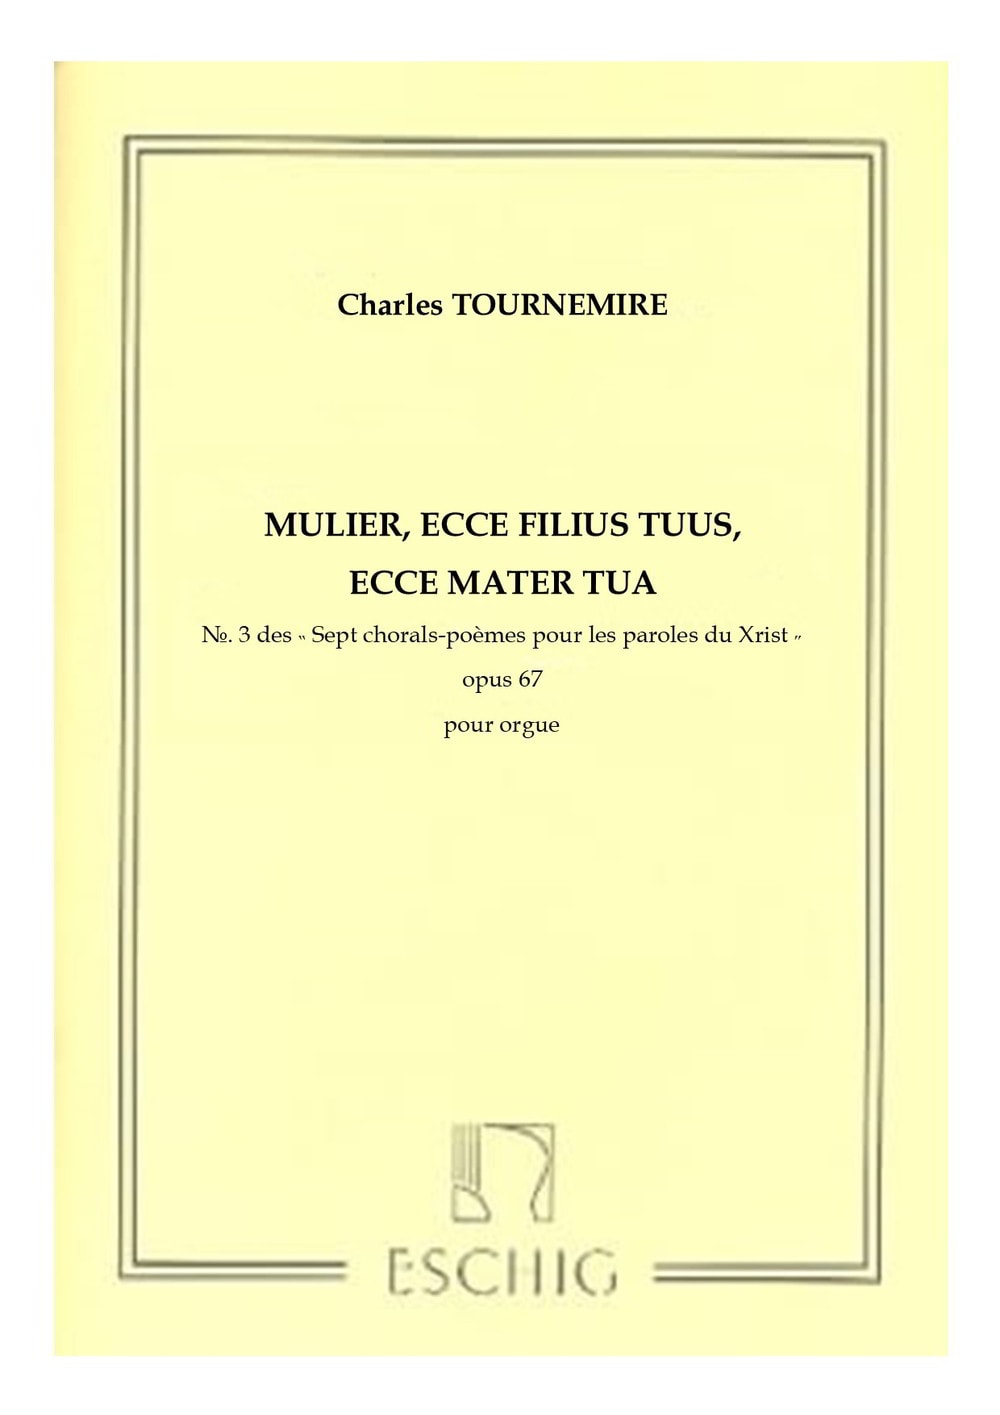 Tournemire: Seven Choral-Poems on the Seven Last Words of Christ Opus 67 No. 3 for Organ published by Max Eschig